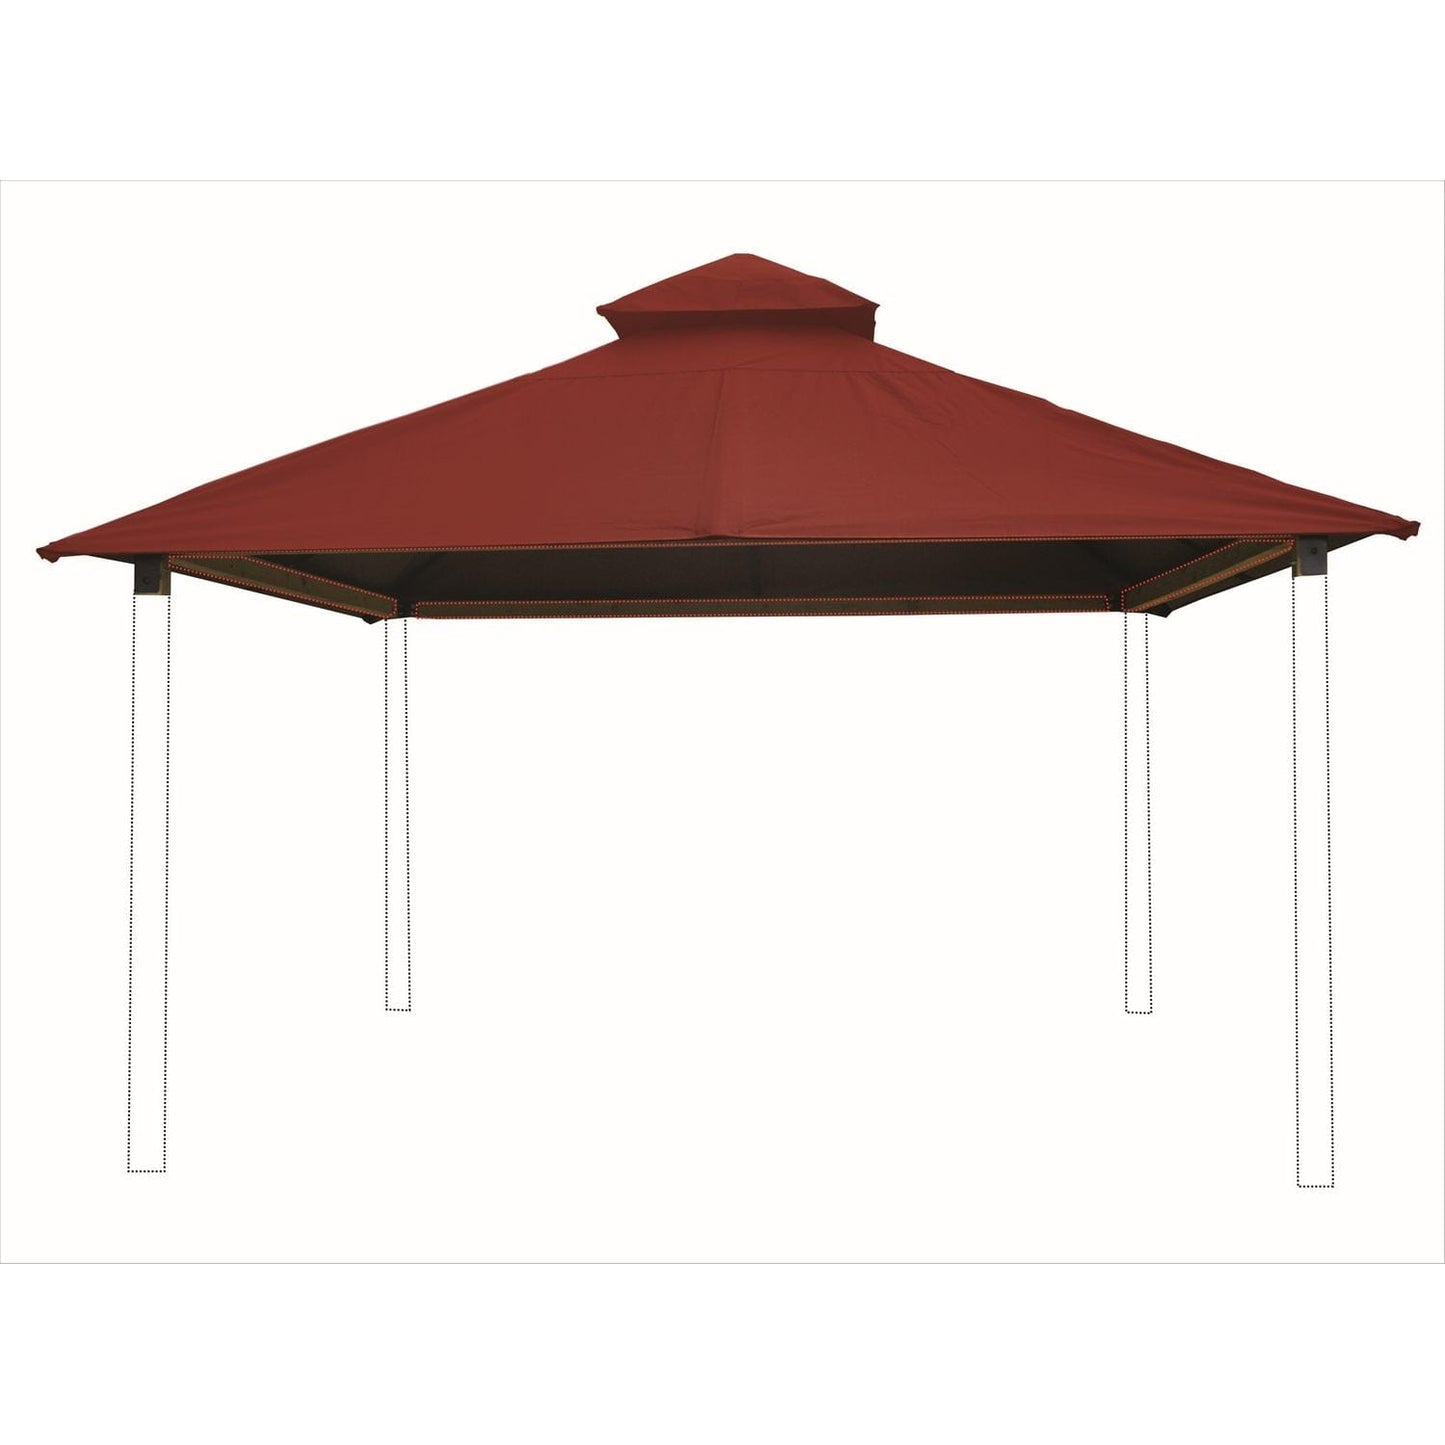 Riverstone Industries Soft Top Gazebos 12FT X 12FT Riverstone | ACACIA Gazebo Roof Framing and Mounting Kit With OutDURA Canopy - Pottery AGOK12-POTTERY